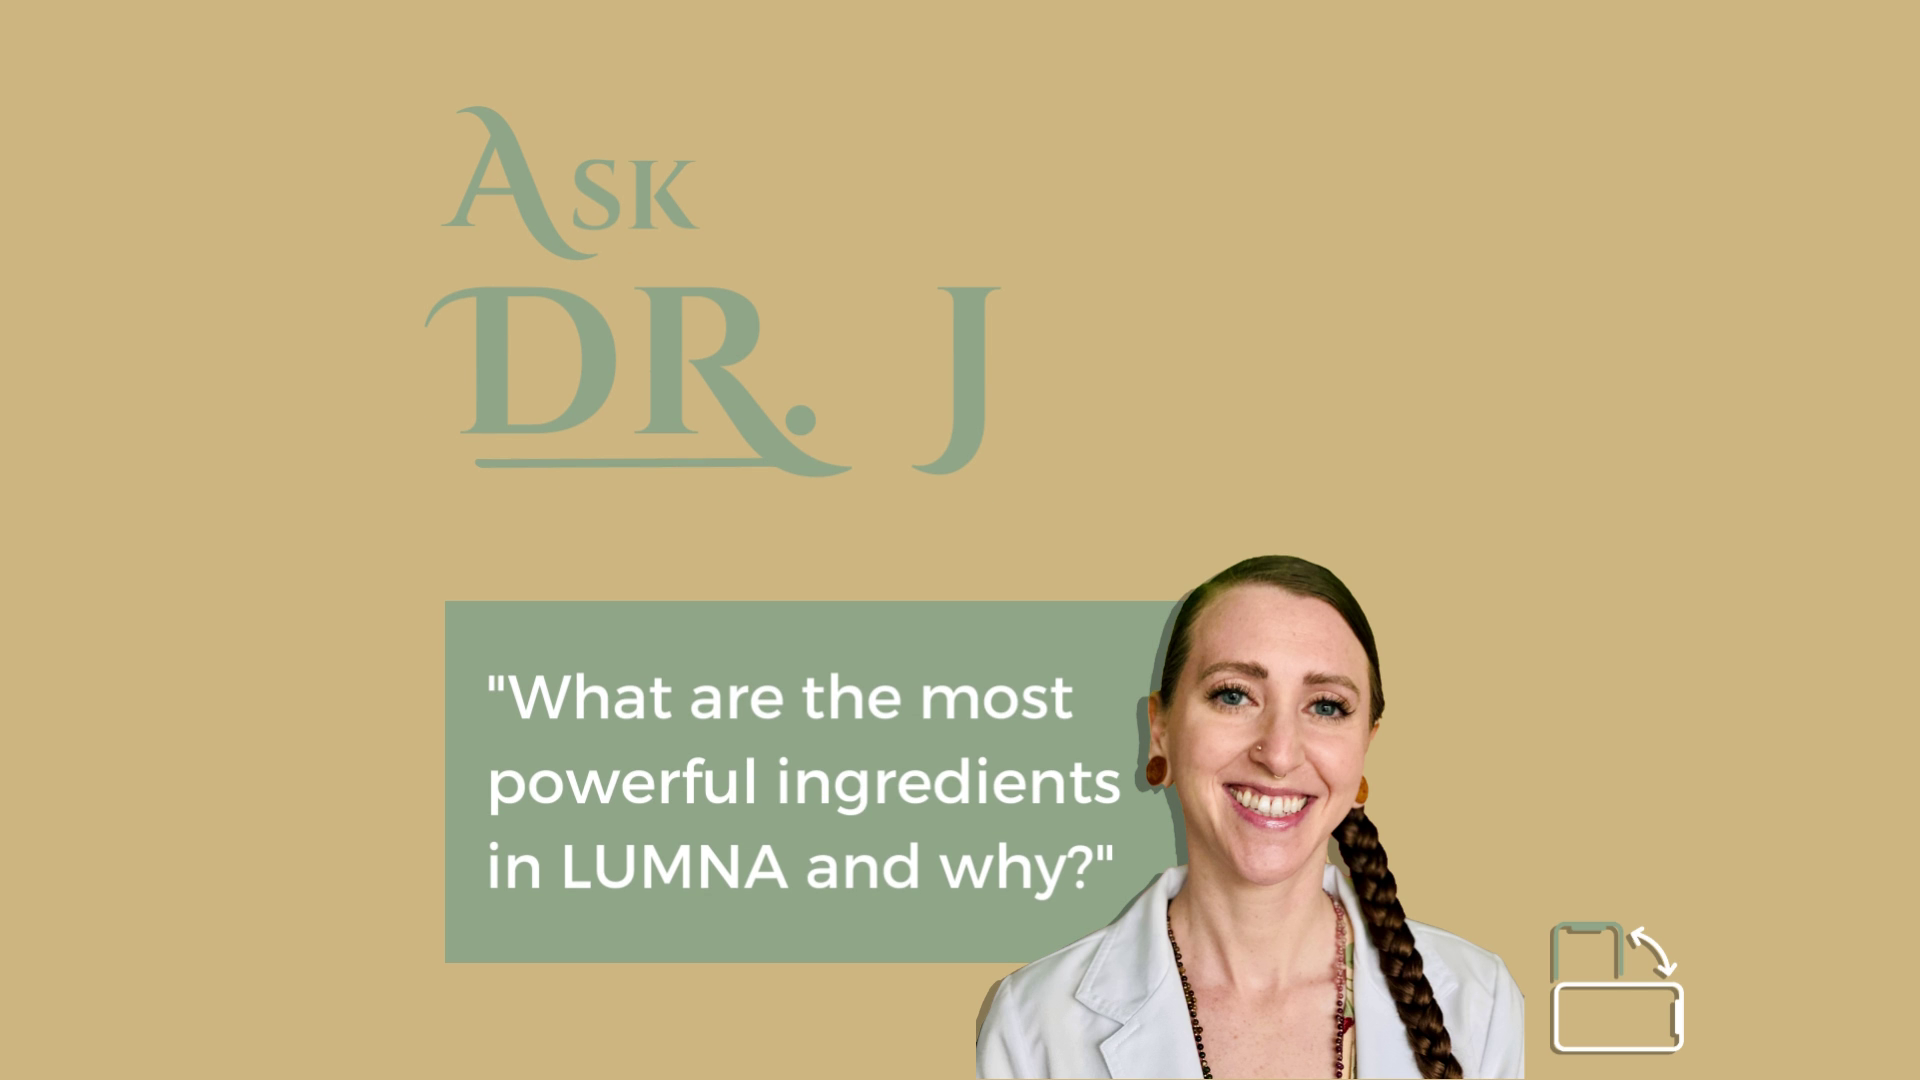 Load video: What are the most powerful ingredients in LUMNA and why?